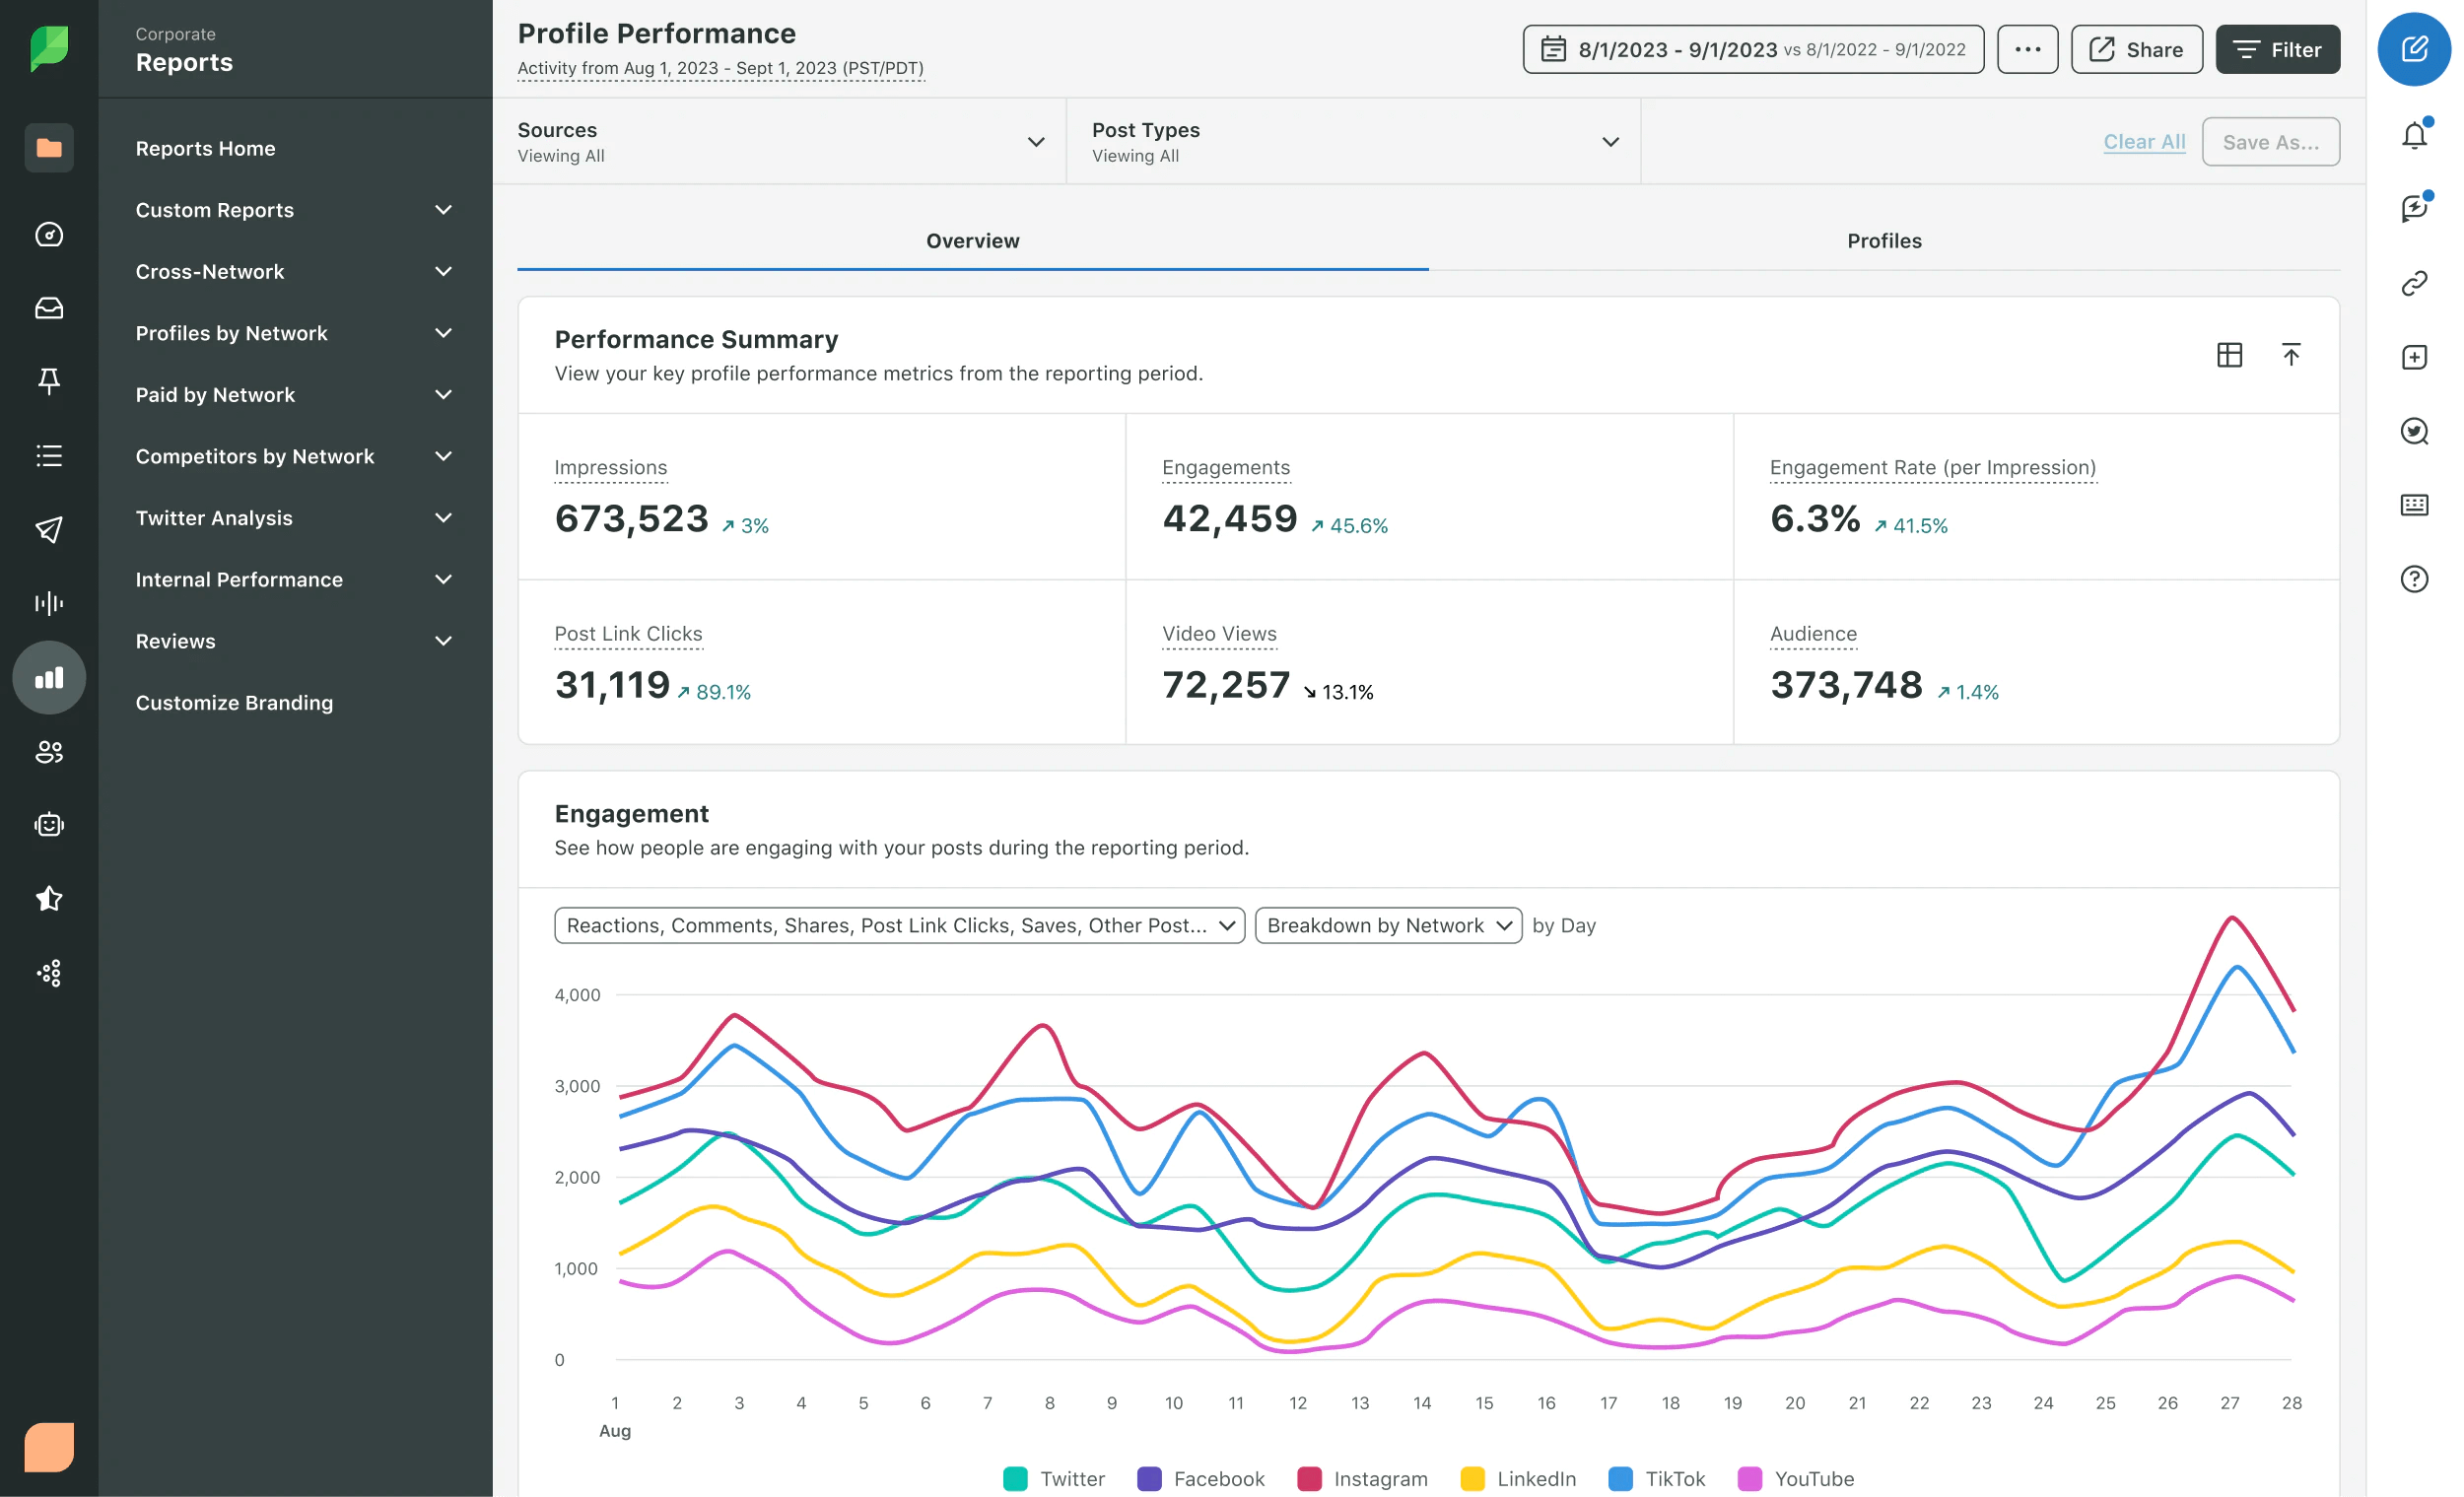 Profile performance dashboard showing metrics from August 1 to September 1, 2023, including impressions, engagements, link clicks, video views, and audience, with an engagement trend graph by social network.